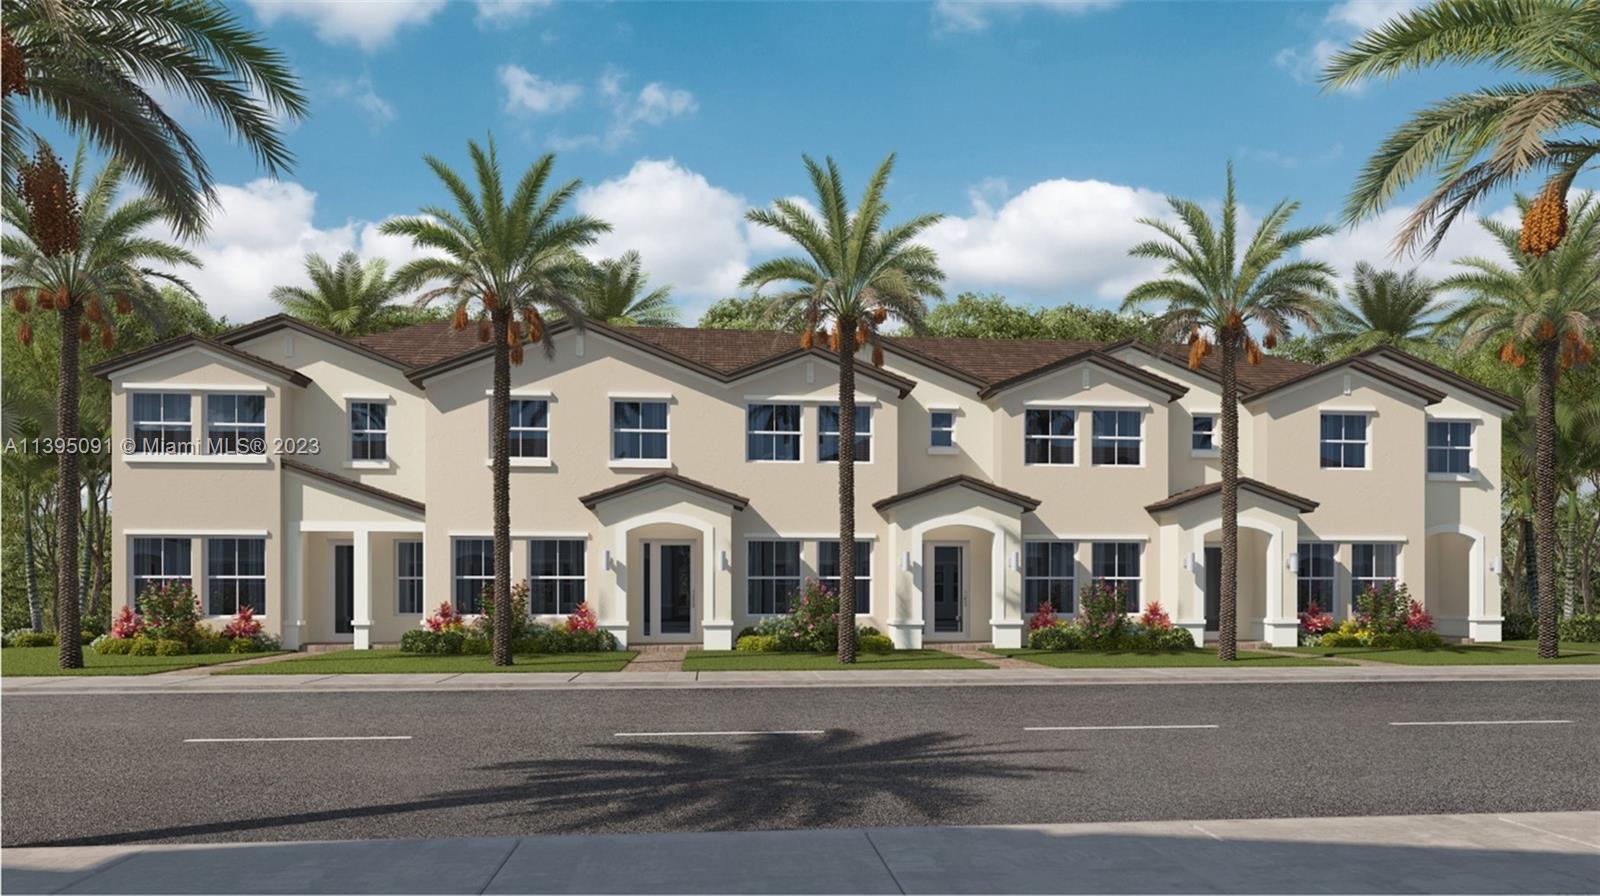 Avalon Square is a community of new townhomes for sale in the suburbs of south Miami-Dade, FL, with convenience to Downtown Miami, Florida Keys and Homestead.